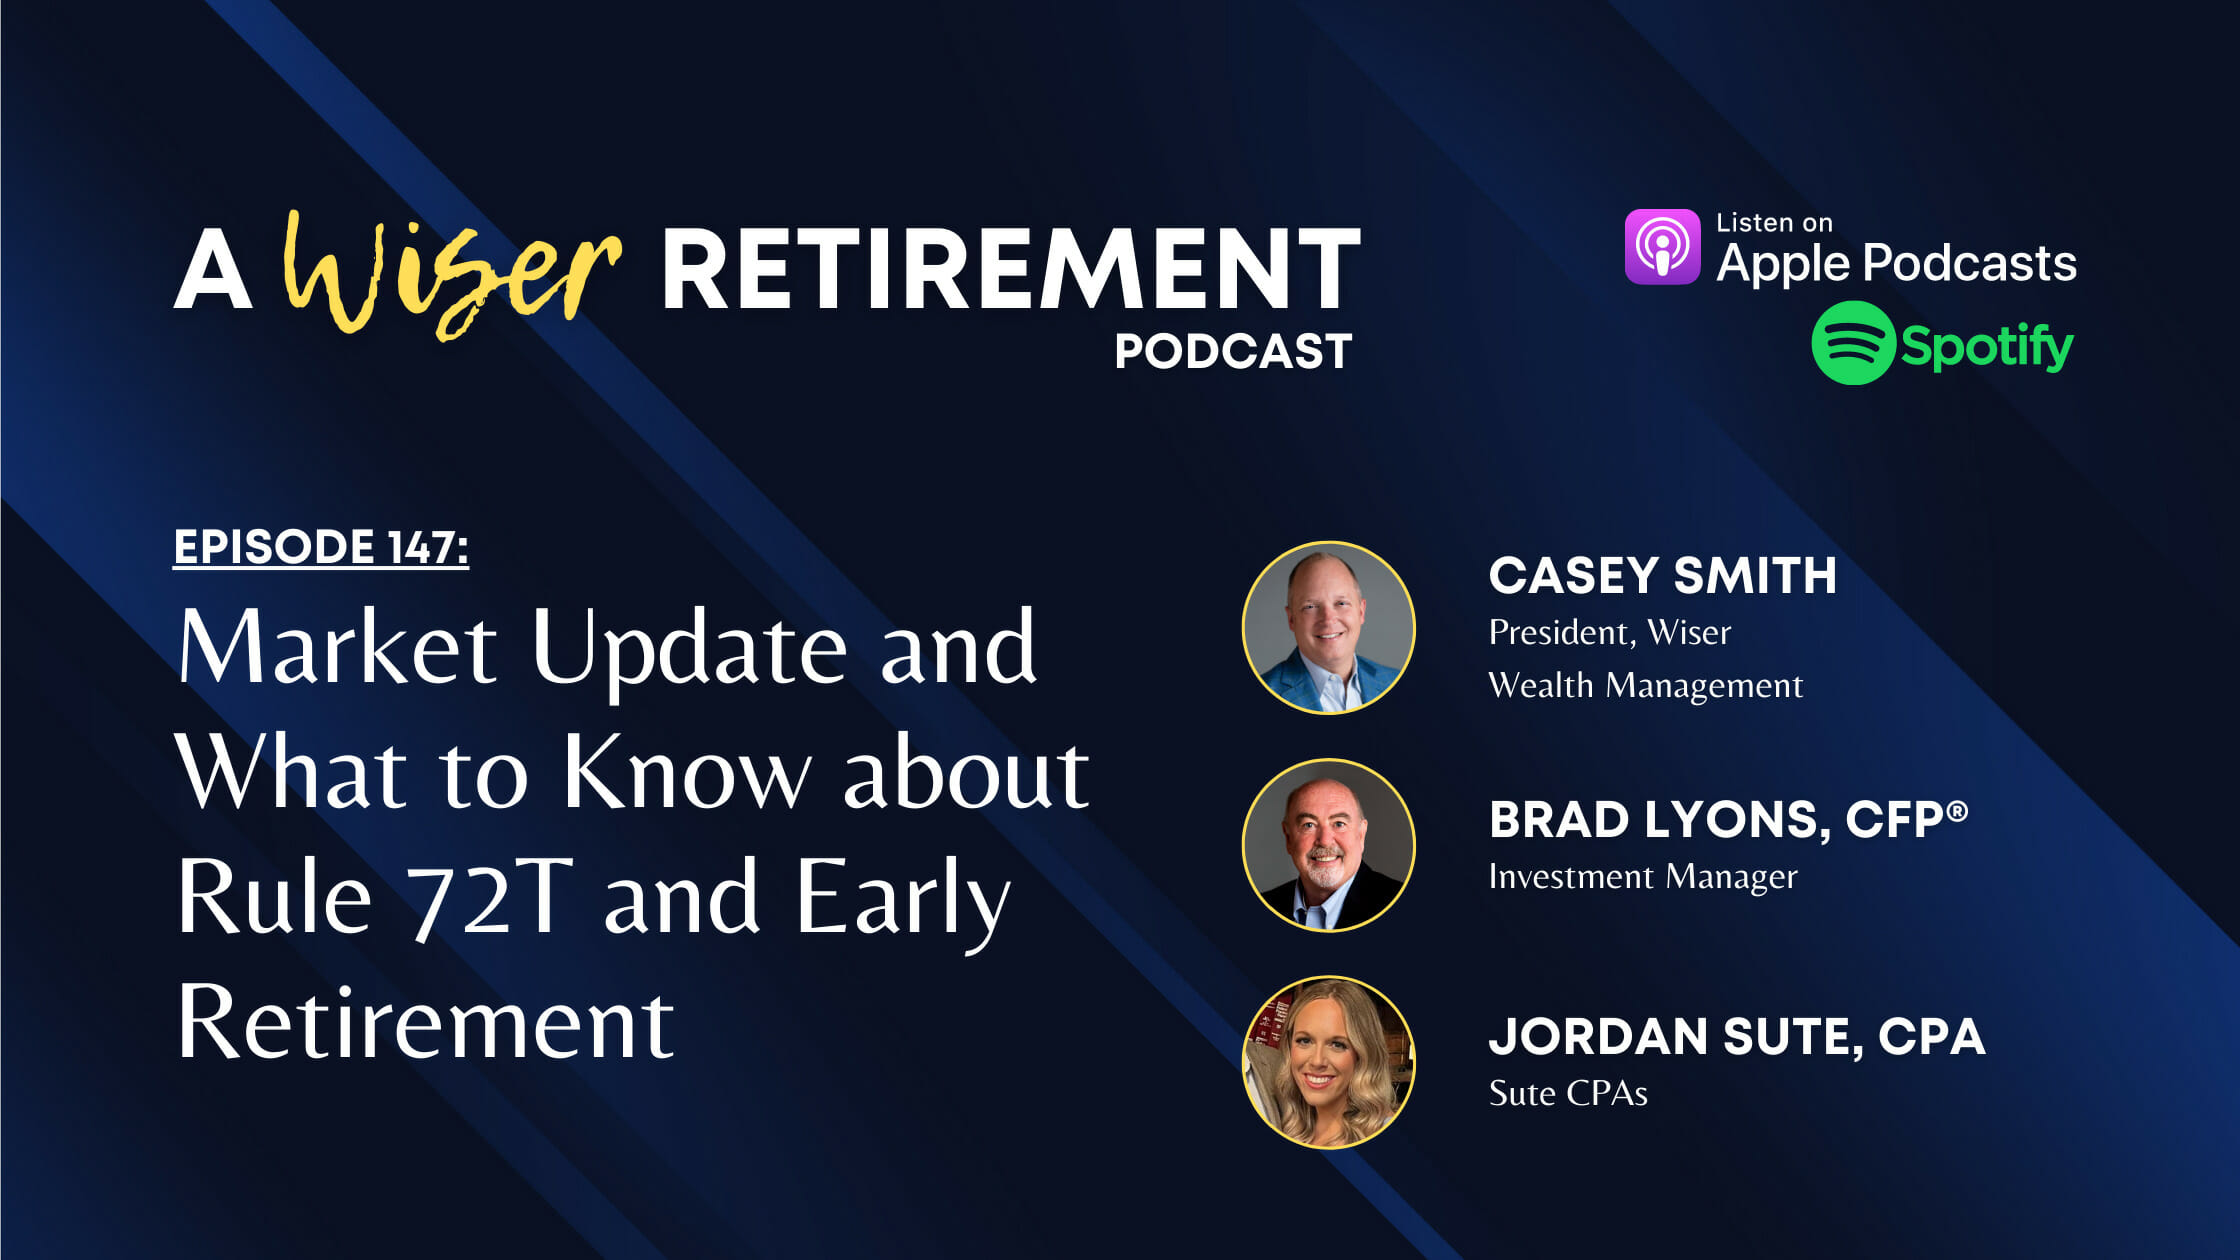 Market Update and What to Know about Rule 72t and Early Retirement